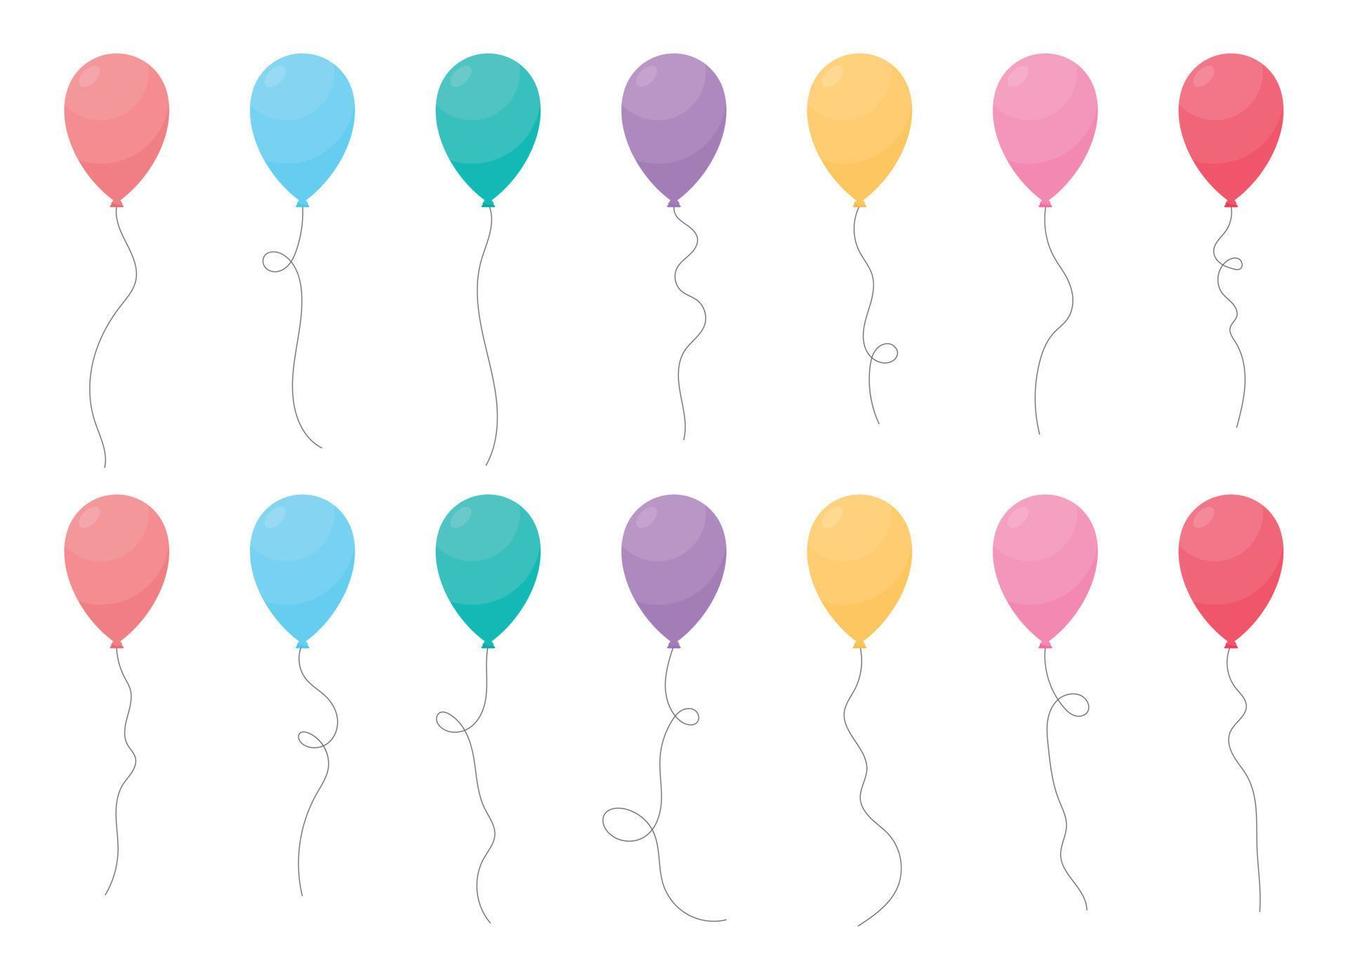 Set of colored party balloons tied with strings. Vector